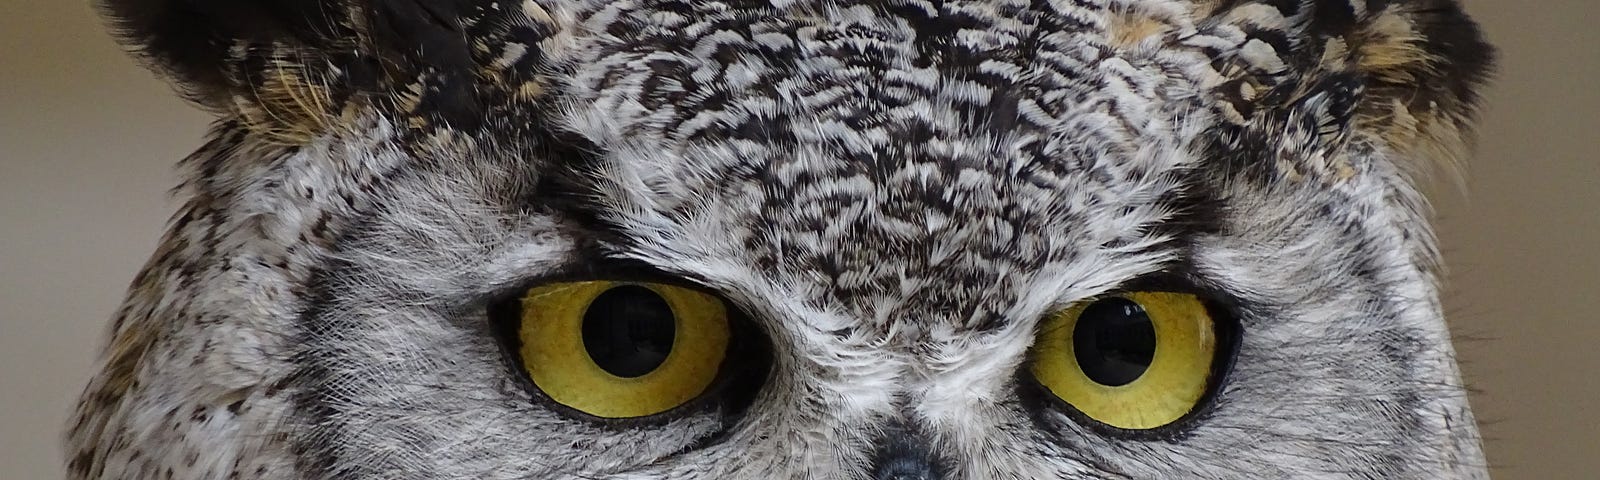 owl with black and white feathers and yellow eyes up close